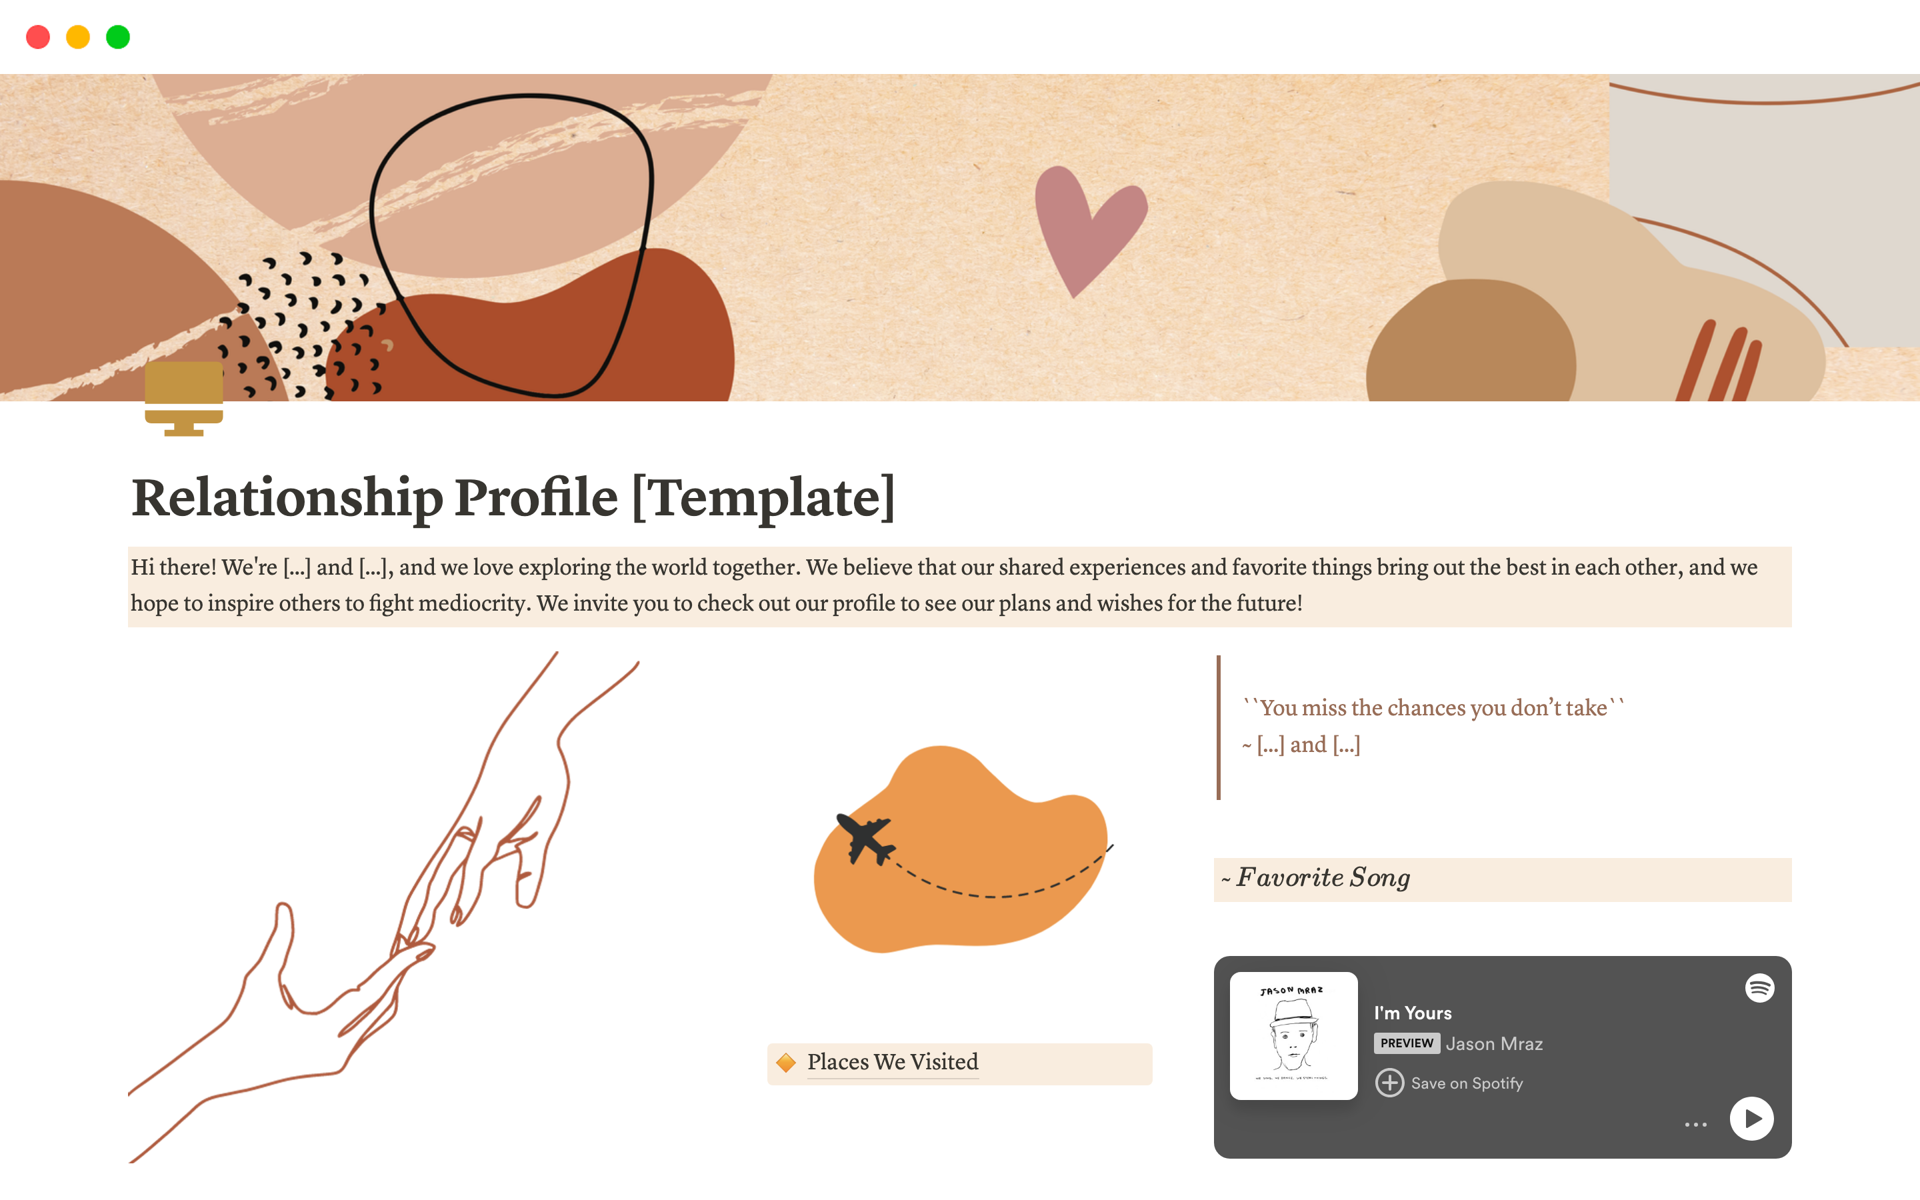 The Relationship Profile is an elegant Notion template designed to create a unique public profile for couples, enabling them to share their journey, memories, and future plans in a visually appealing and accessible format.